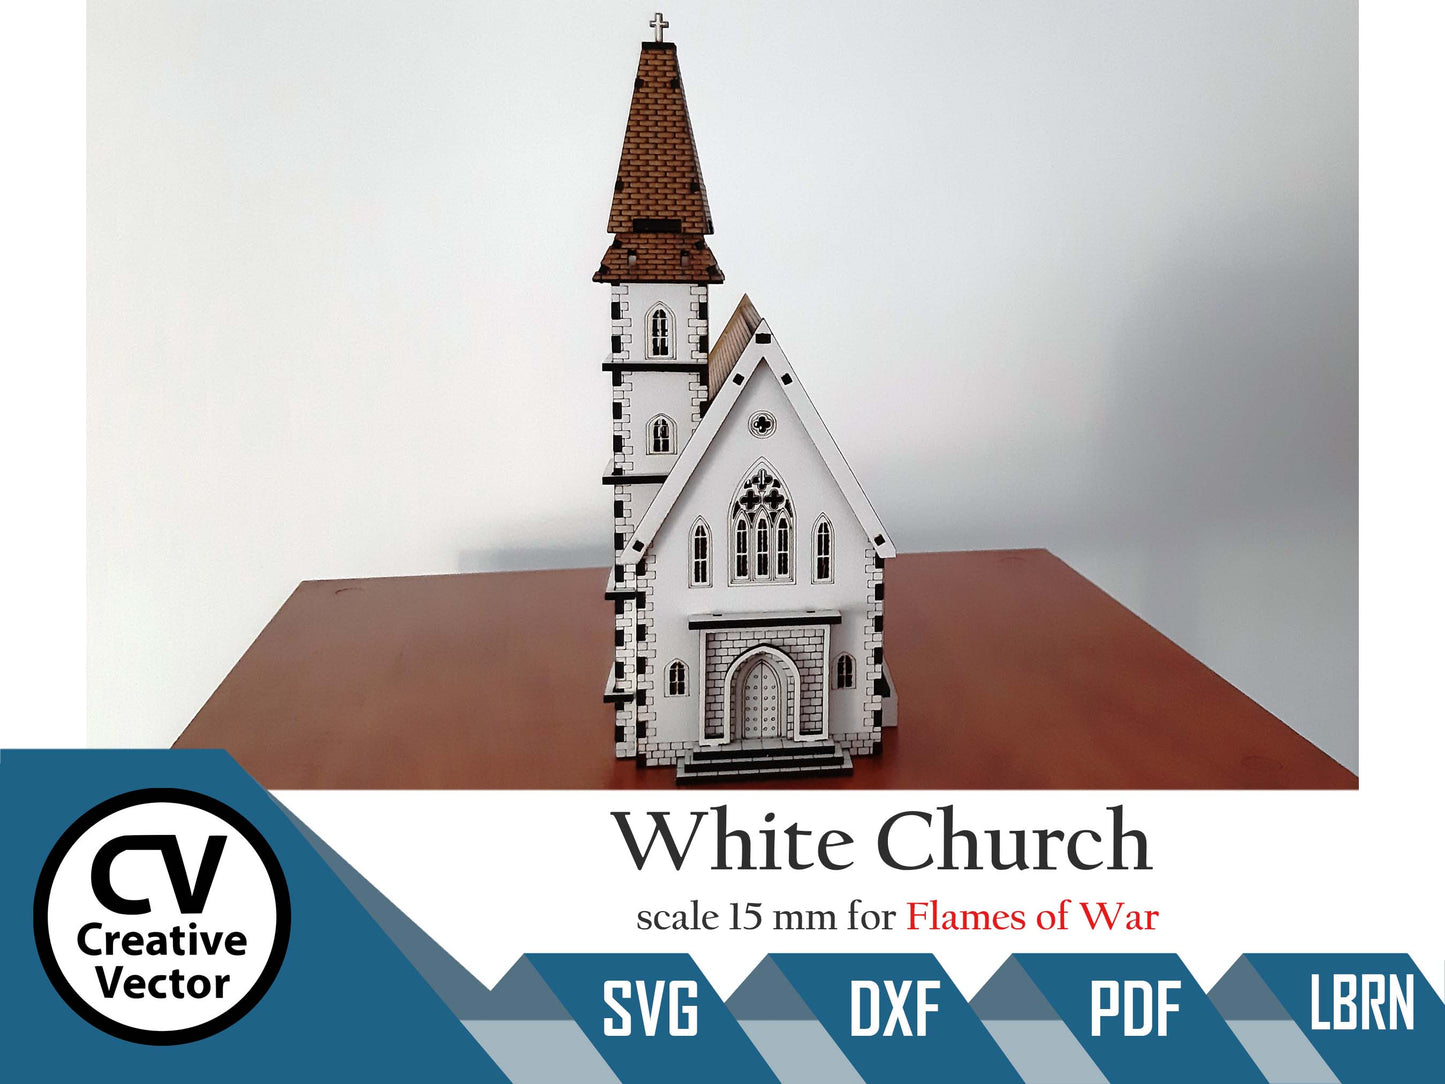 White Church in scale 15mm (1:100 / 1:87 / H0) for game Flames of War